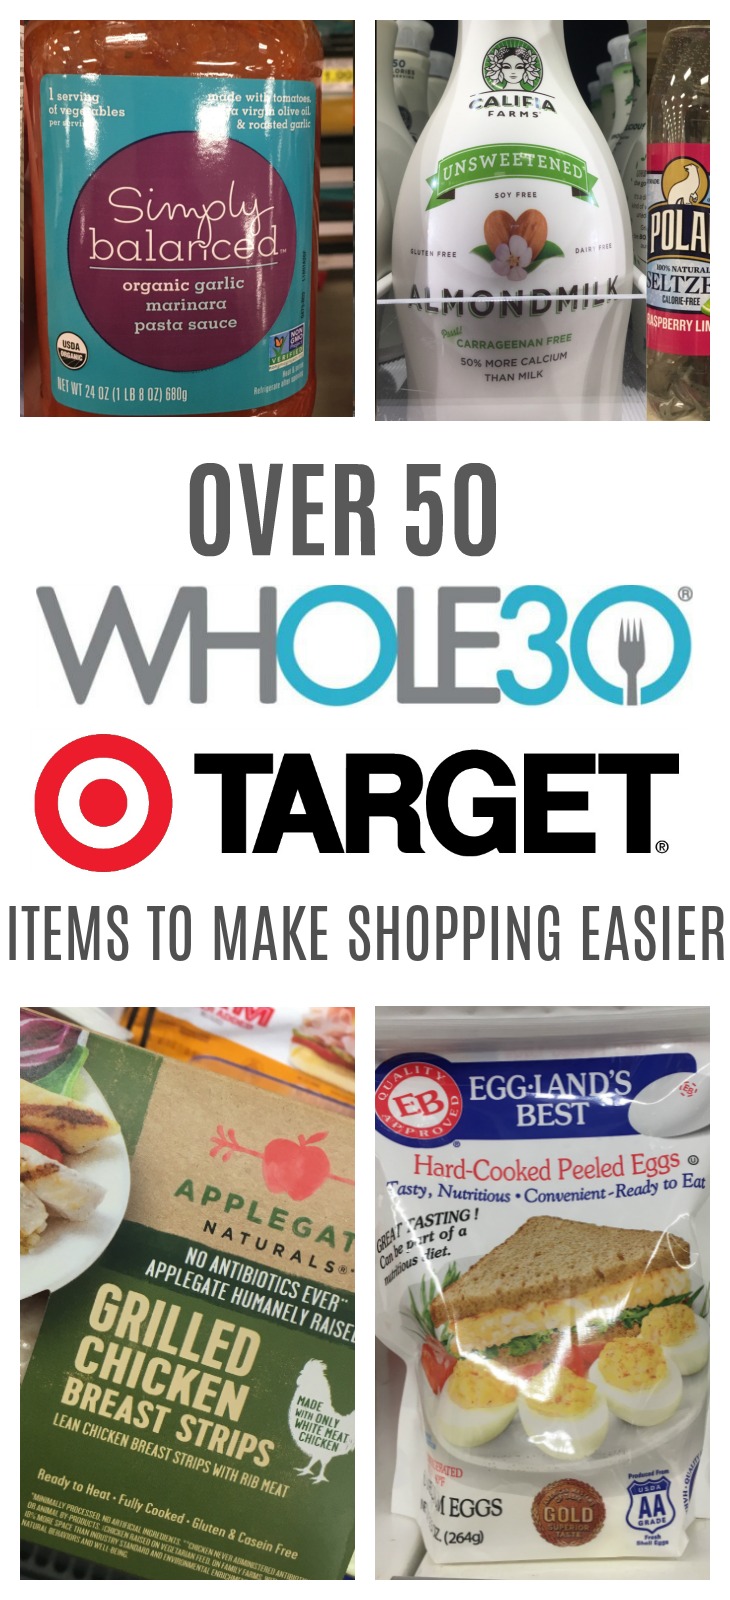 Target Whole30 Grocery List: 50+ Whole30 Compliant Items To Get At Target -  Whole Kitchen Sink